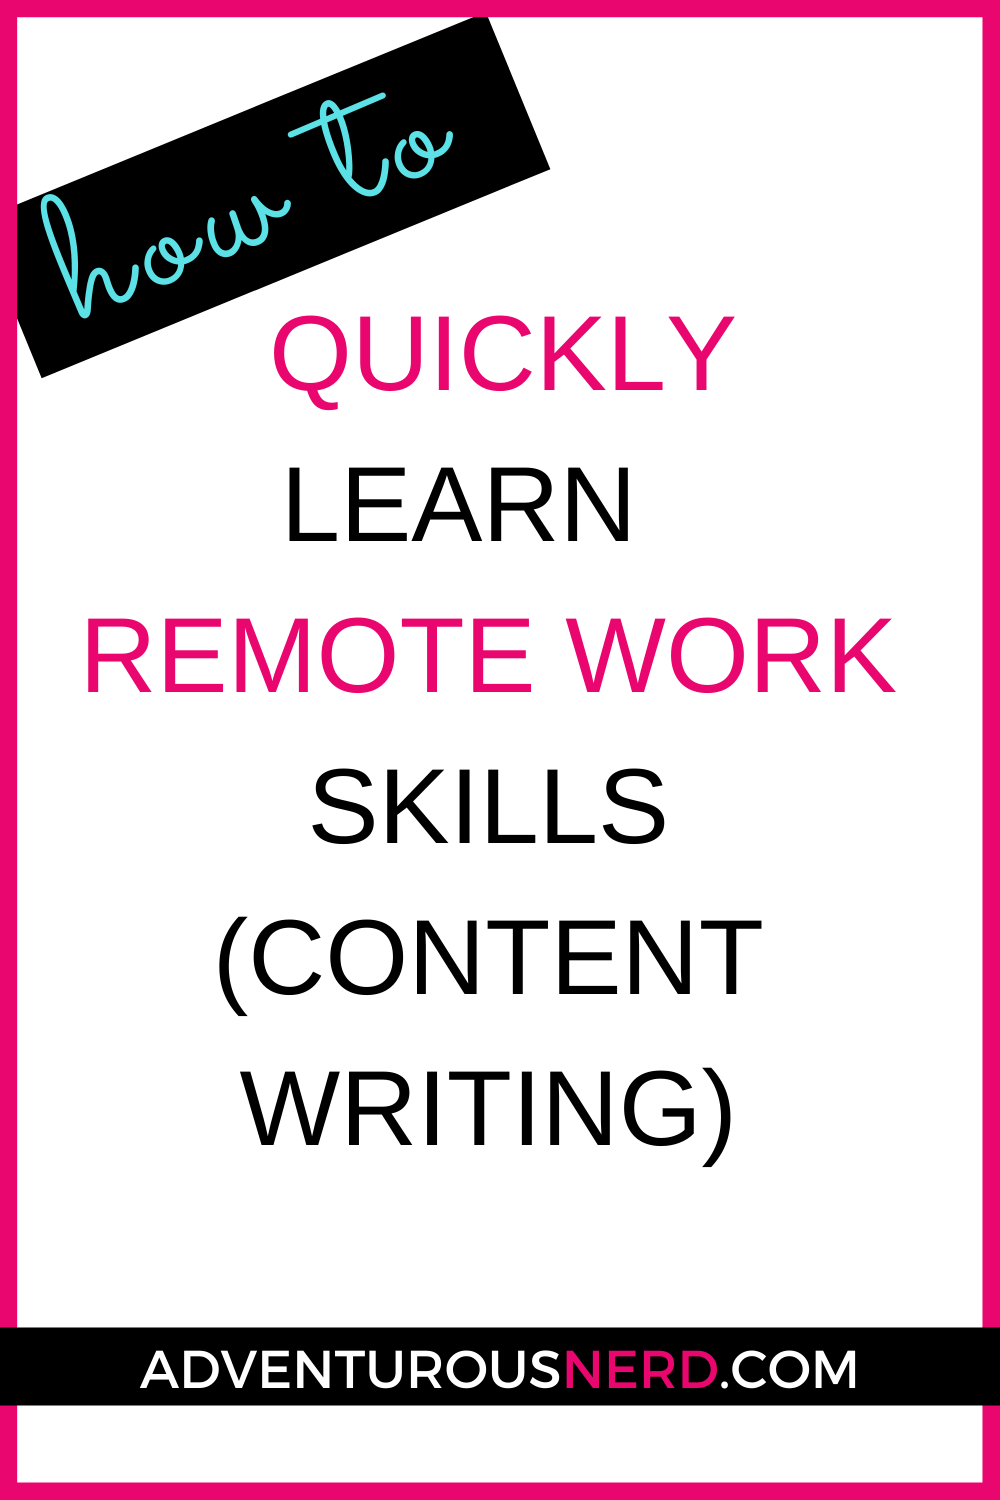 image of text box quickly learn a remote work skill content writing